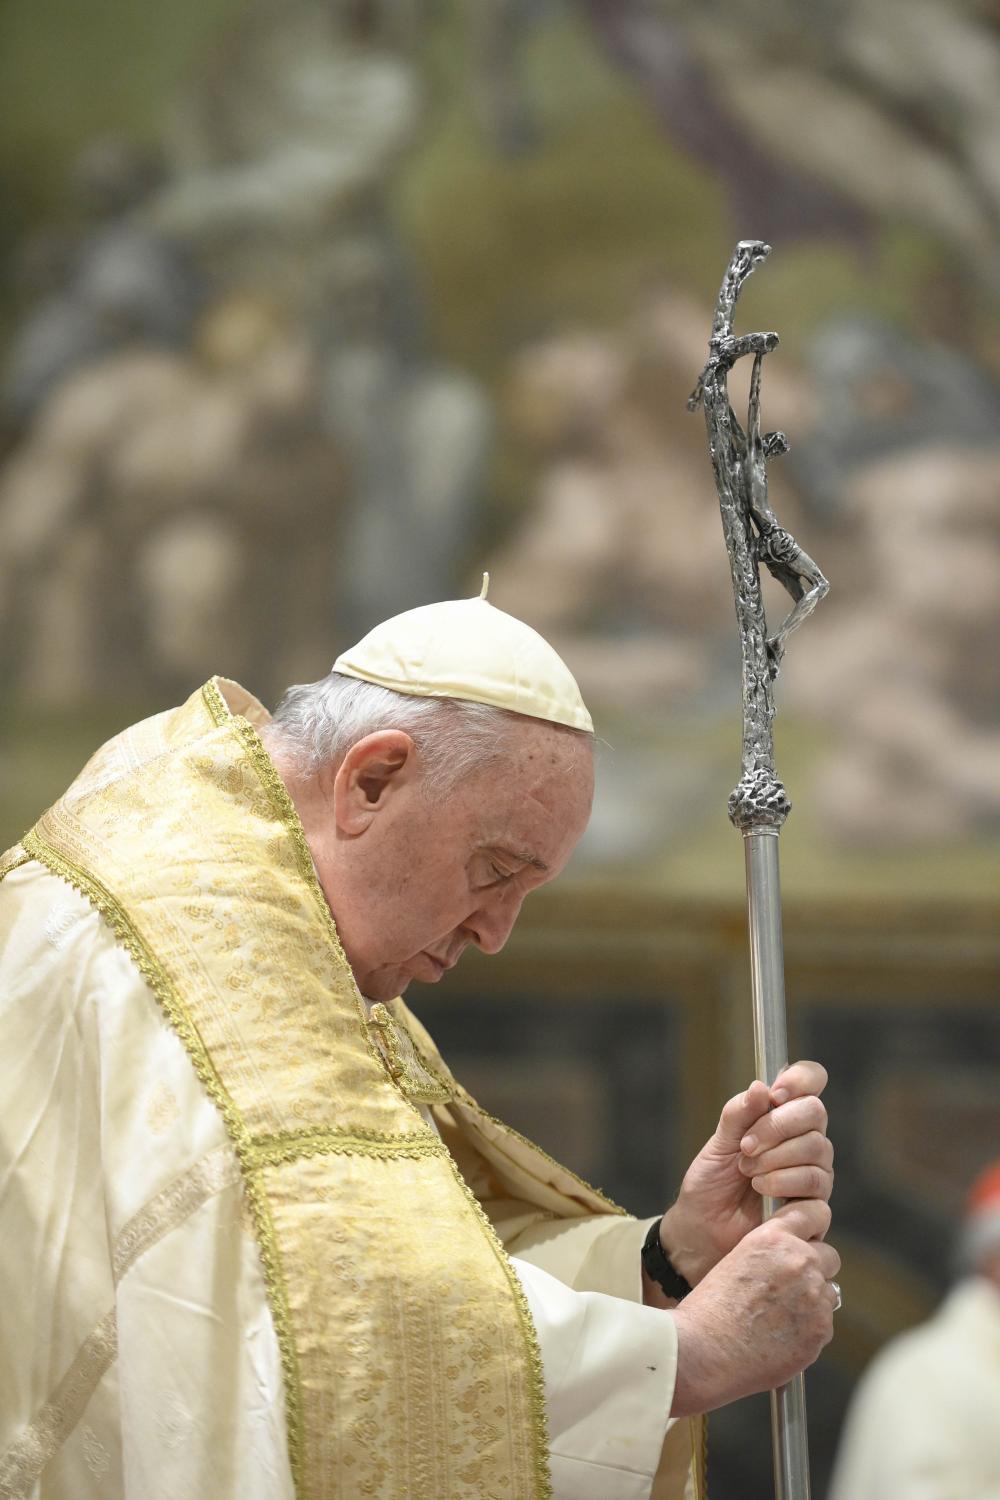 Pope Francis holds his crosier as he celebrates Mass on the feast of the Baptism of the Lord in the Sistine Chapel at the Vatican Jan. 8, 2023. The pope baptized 13 babies at the Mass. (CNS photo/Vatican Media)